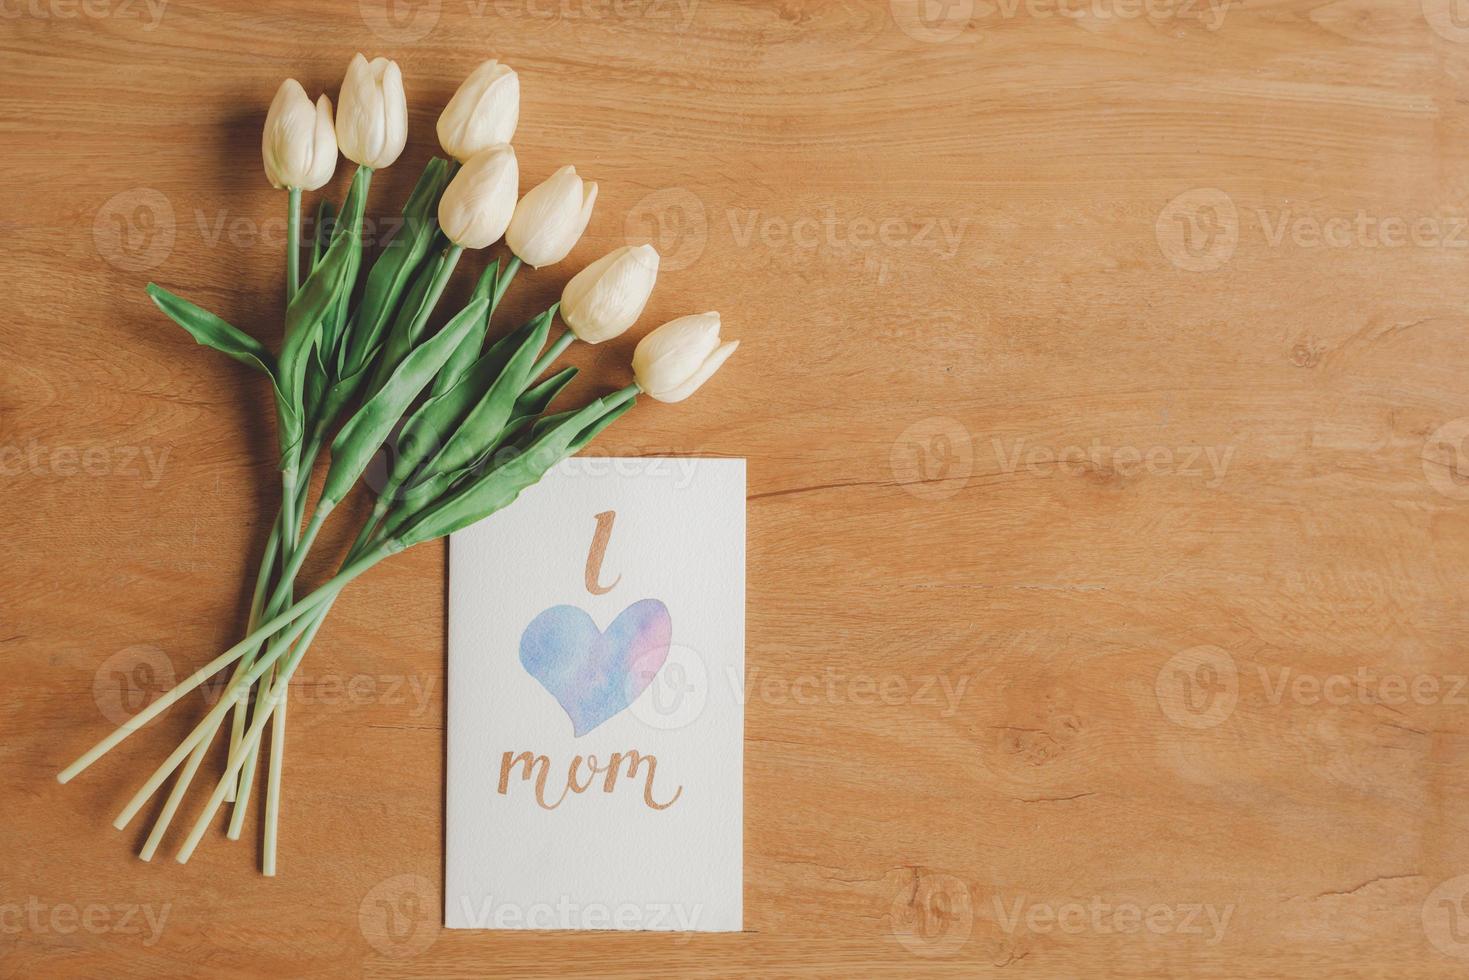 I love mom greeting card and flowers photo